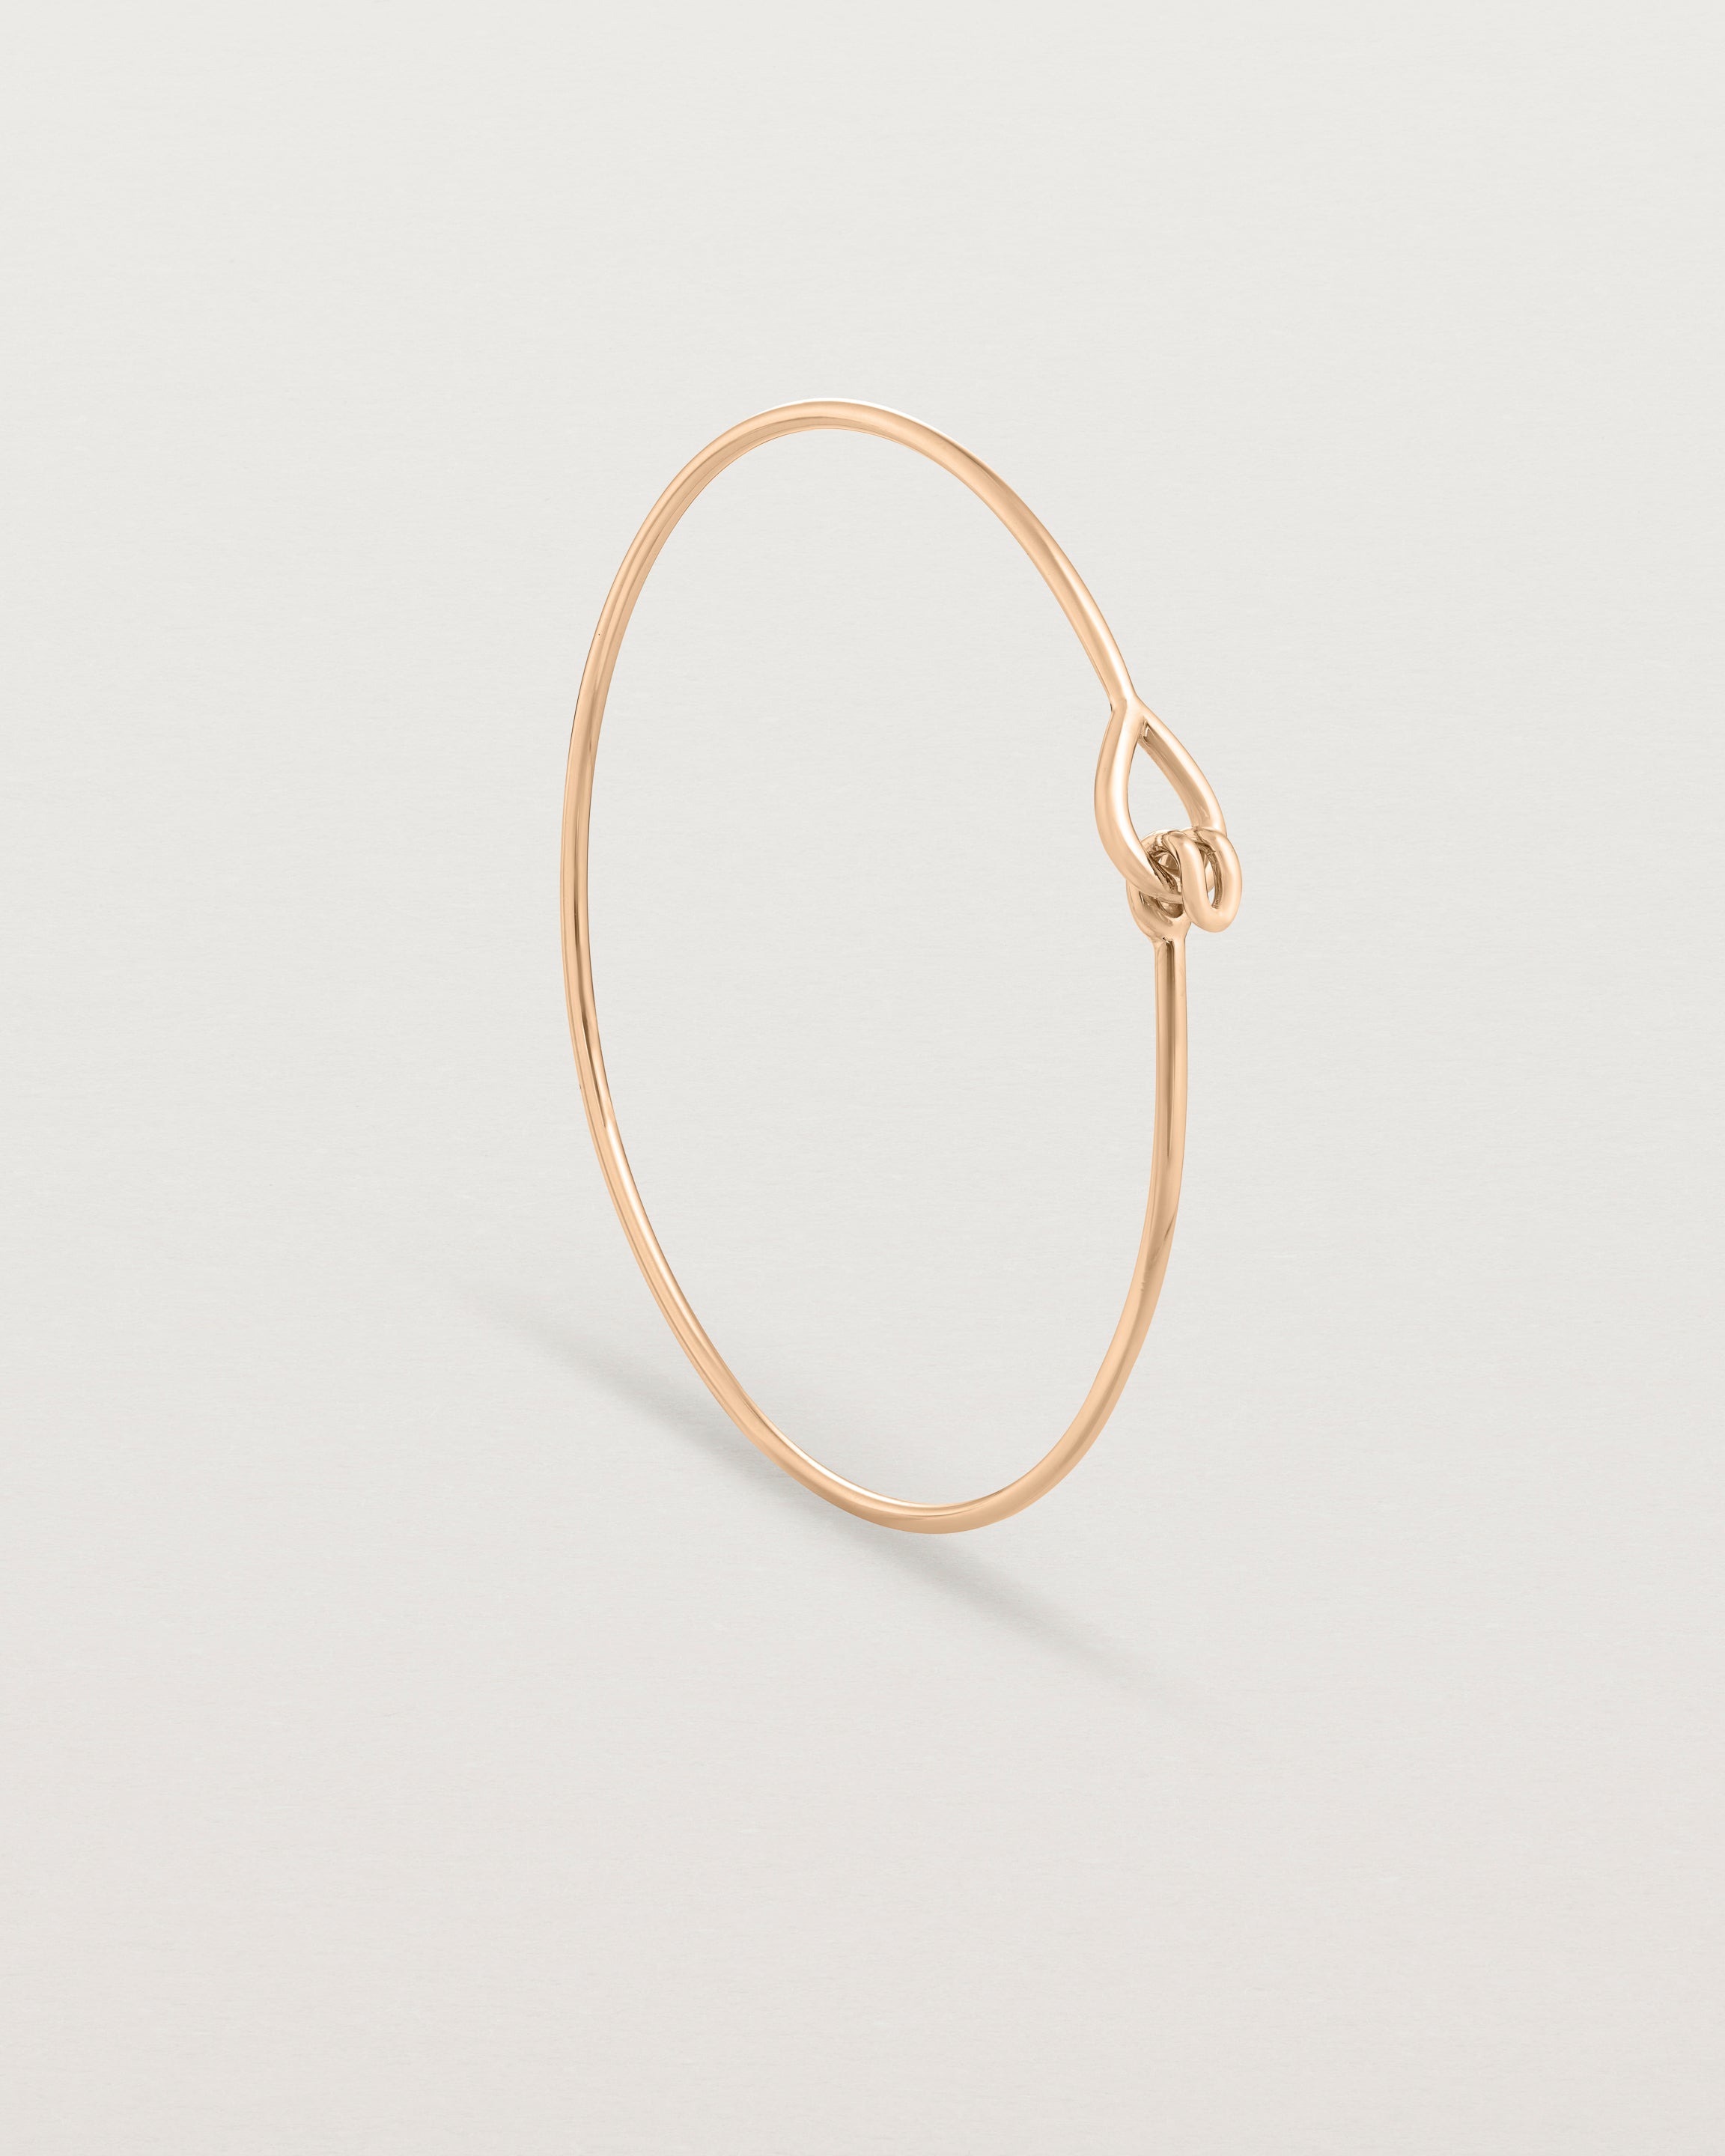 Standing view of the Oana Bangle in rose gold.